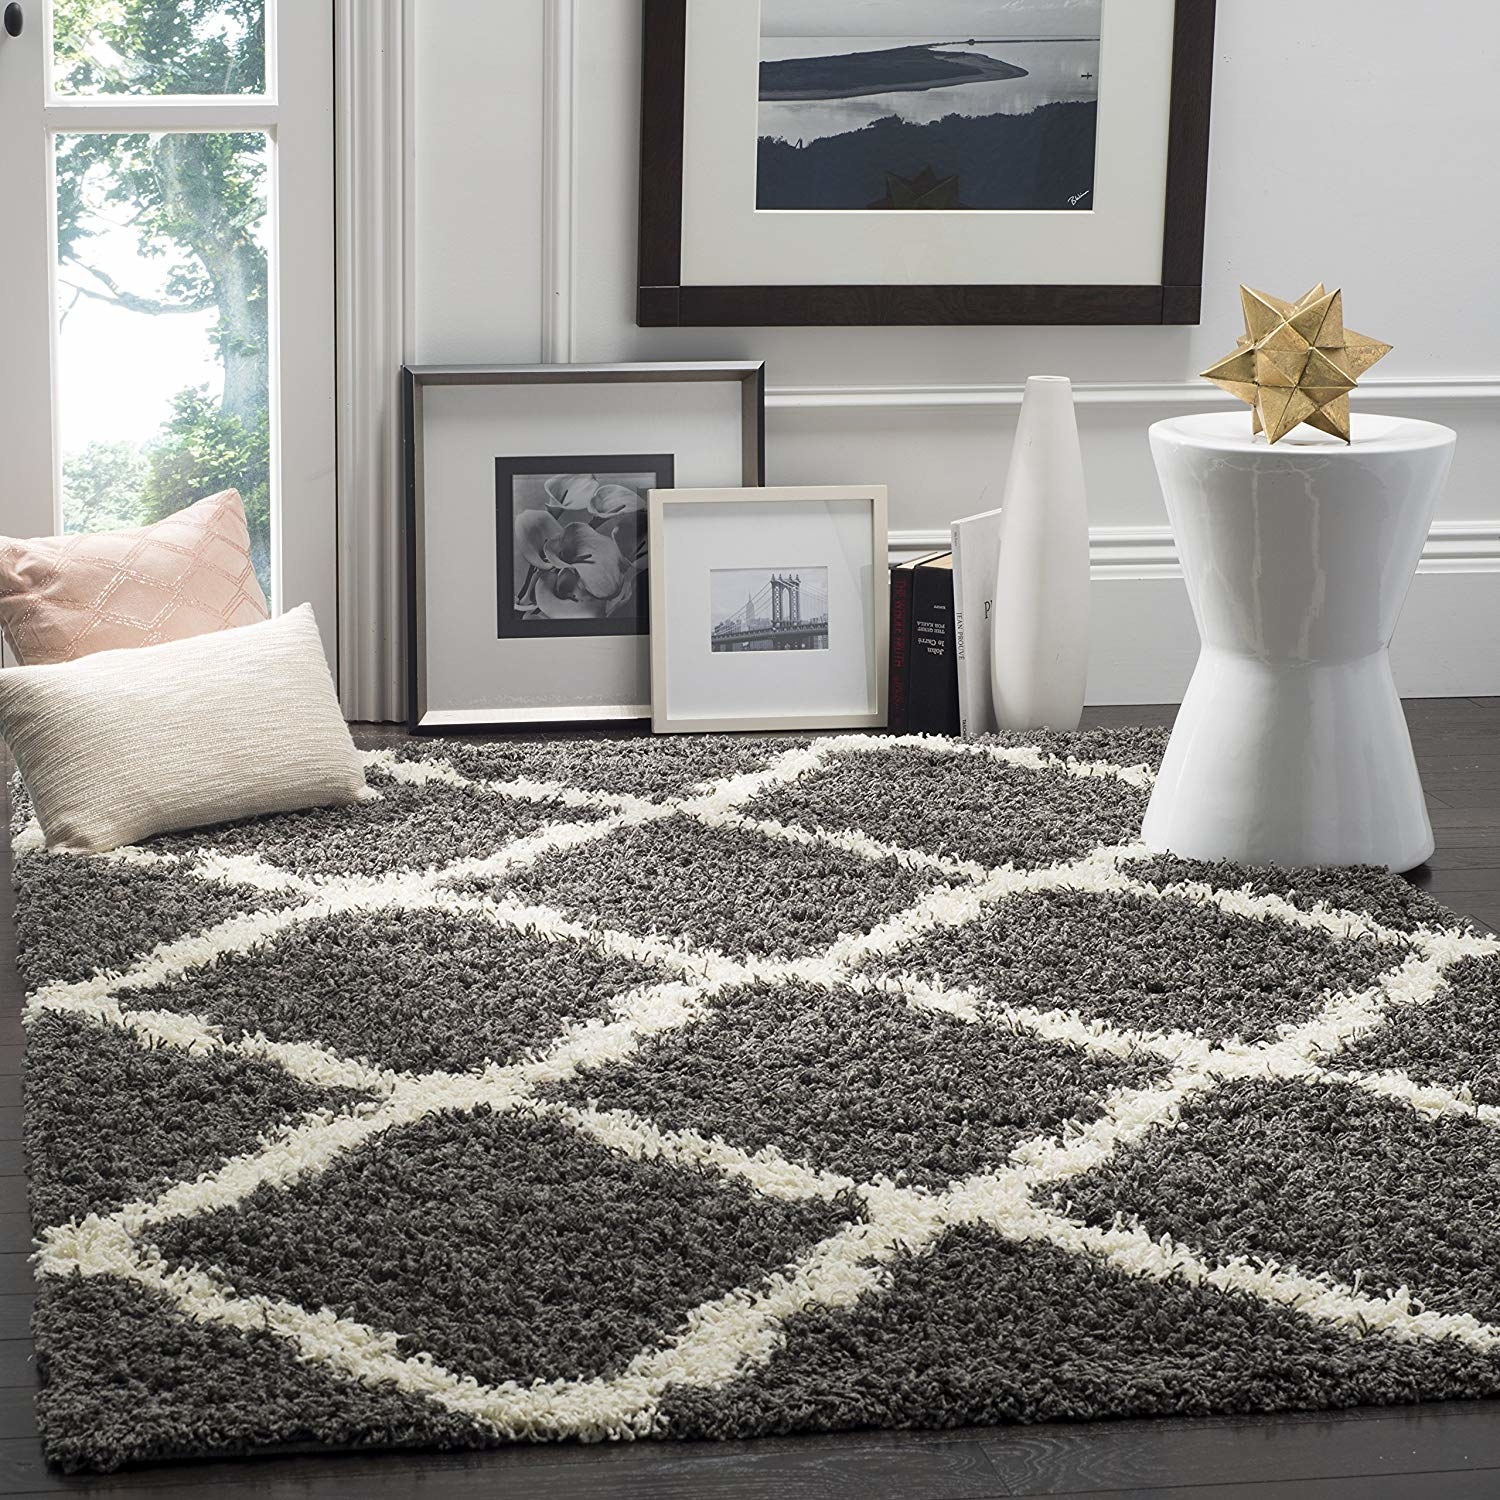 a gray rug with a white diamond pattern